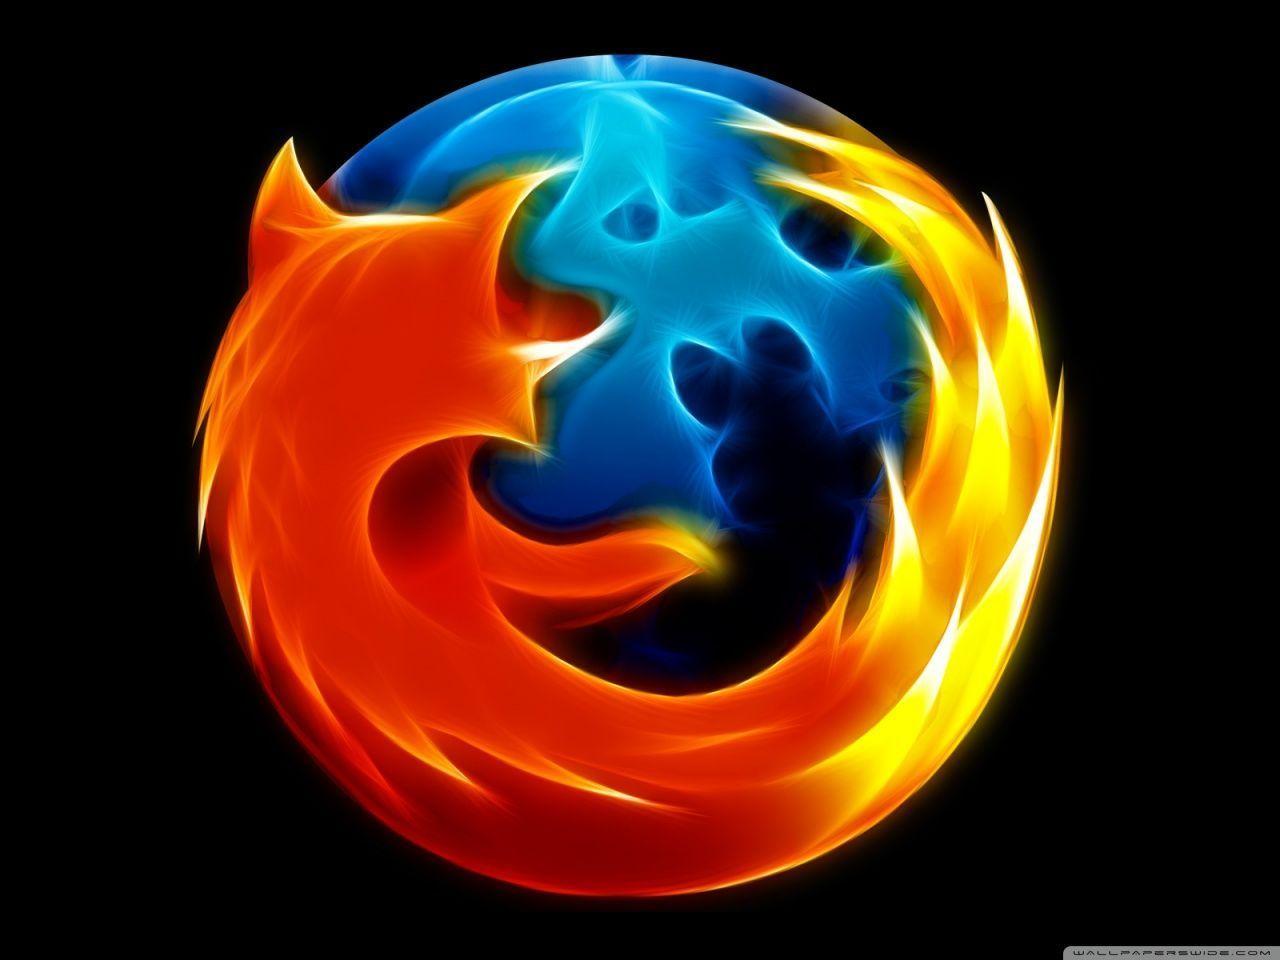 Firefox Backgrounds Themes - Wallpaper Cave1280 x 960